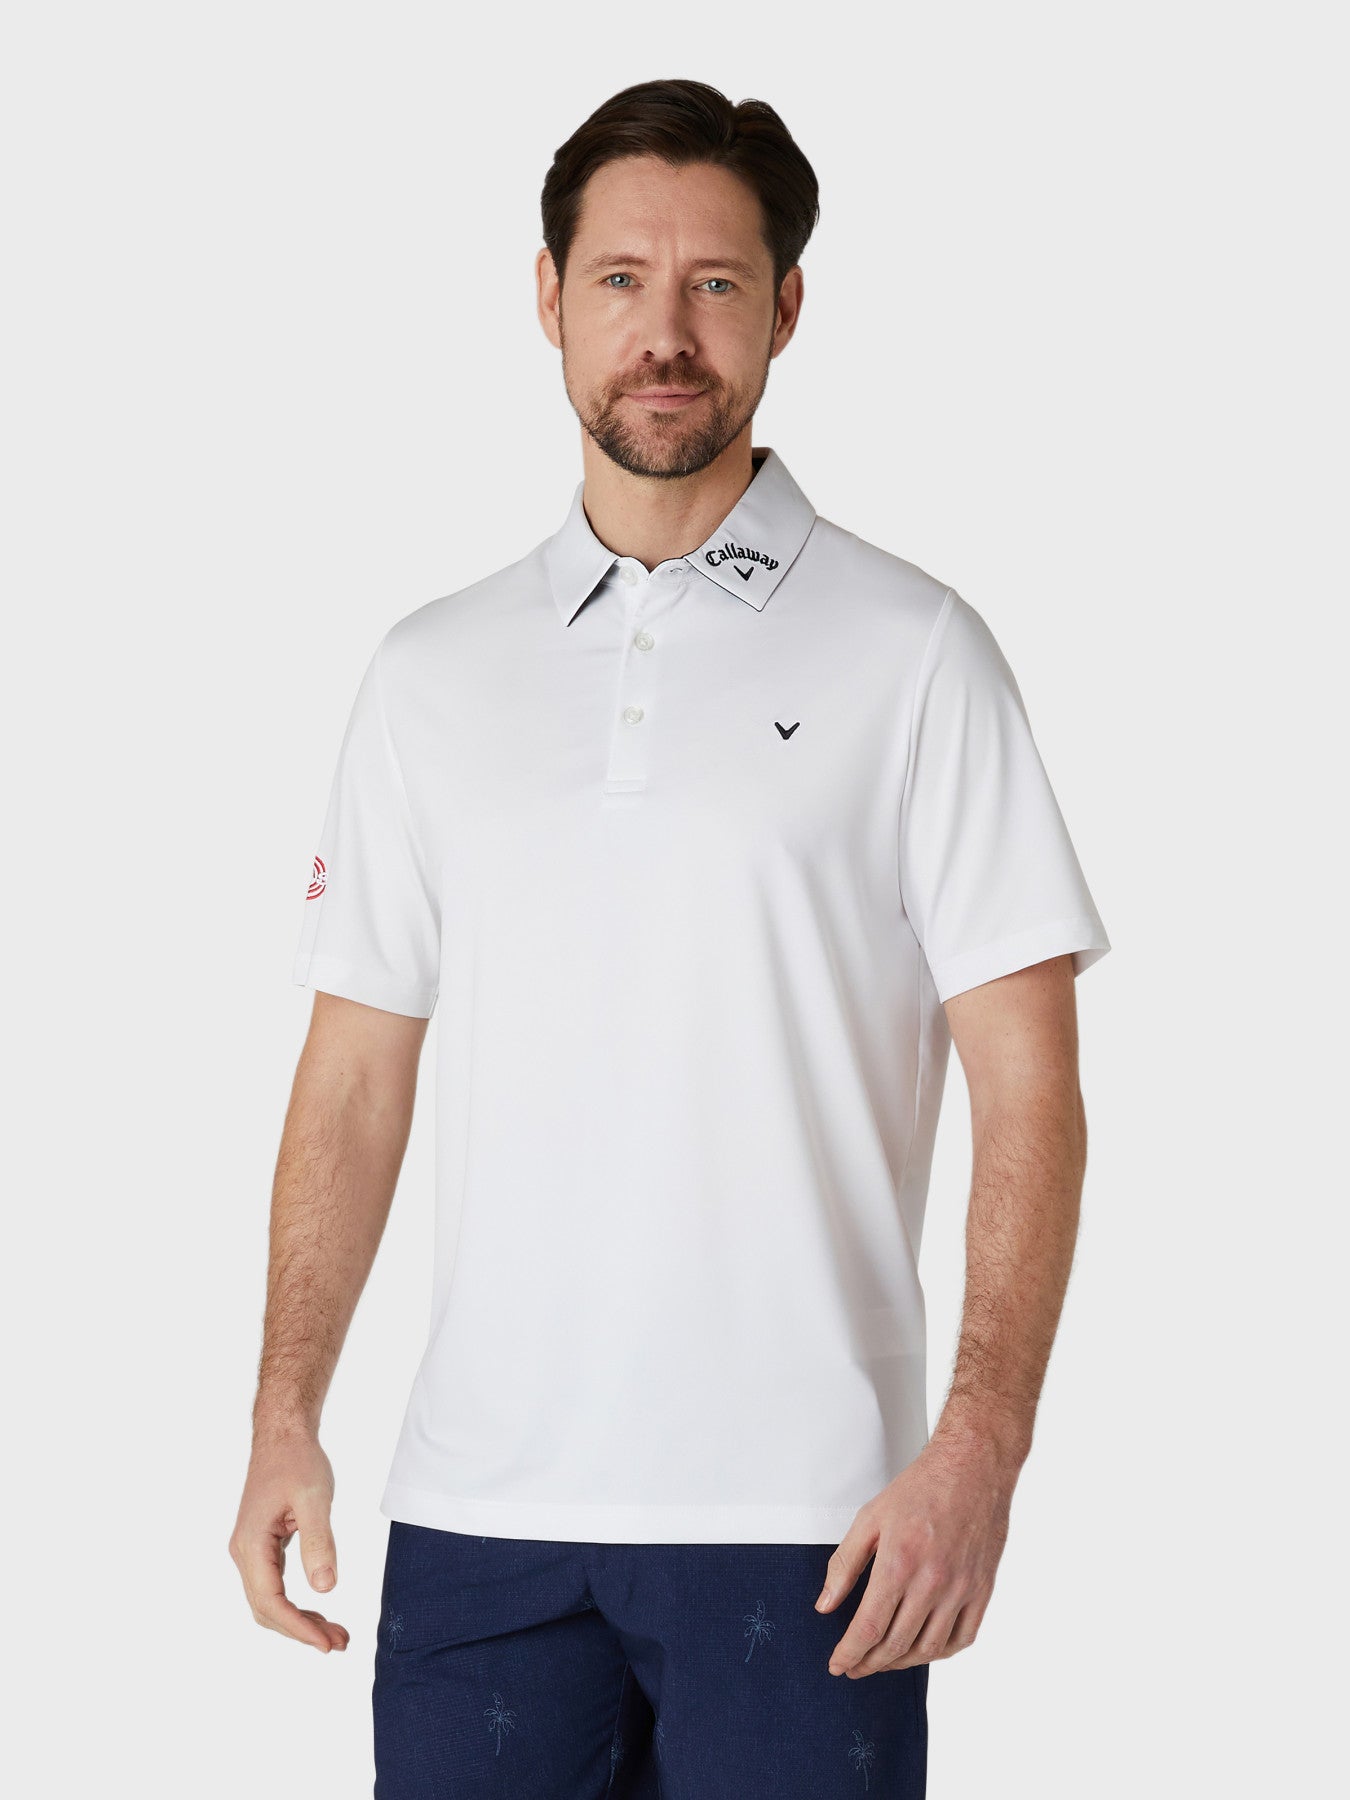 View Short Sleeve Odyssey Block Polo Shirt In Bright White information